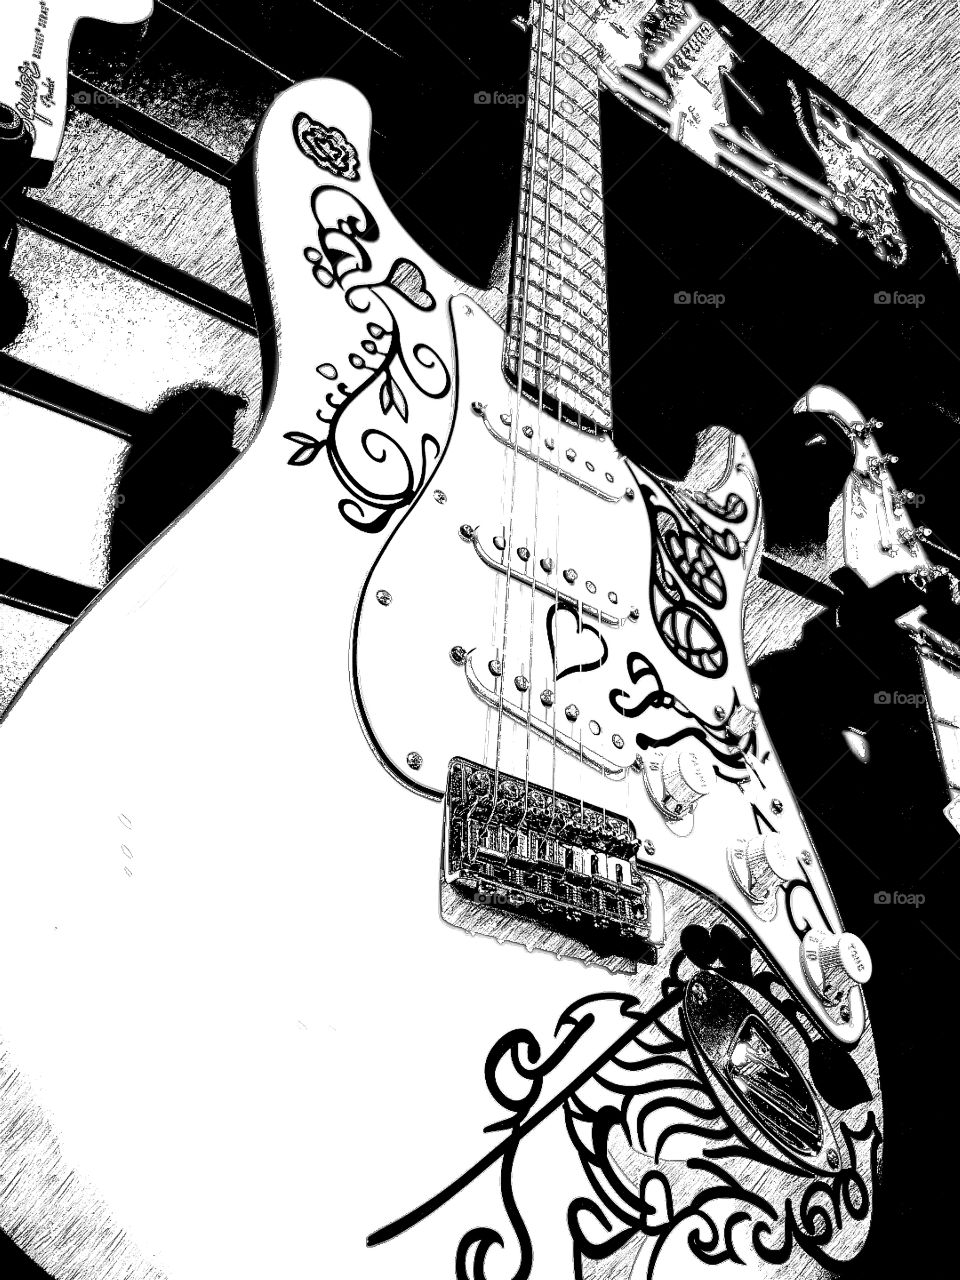 10-11-18 Electric Guitar black and White Pics 3